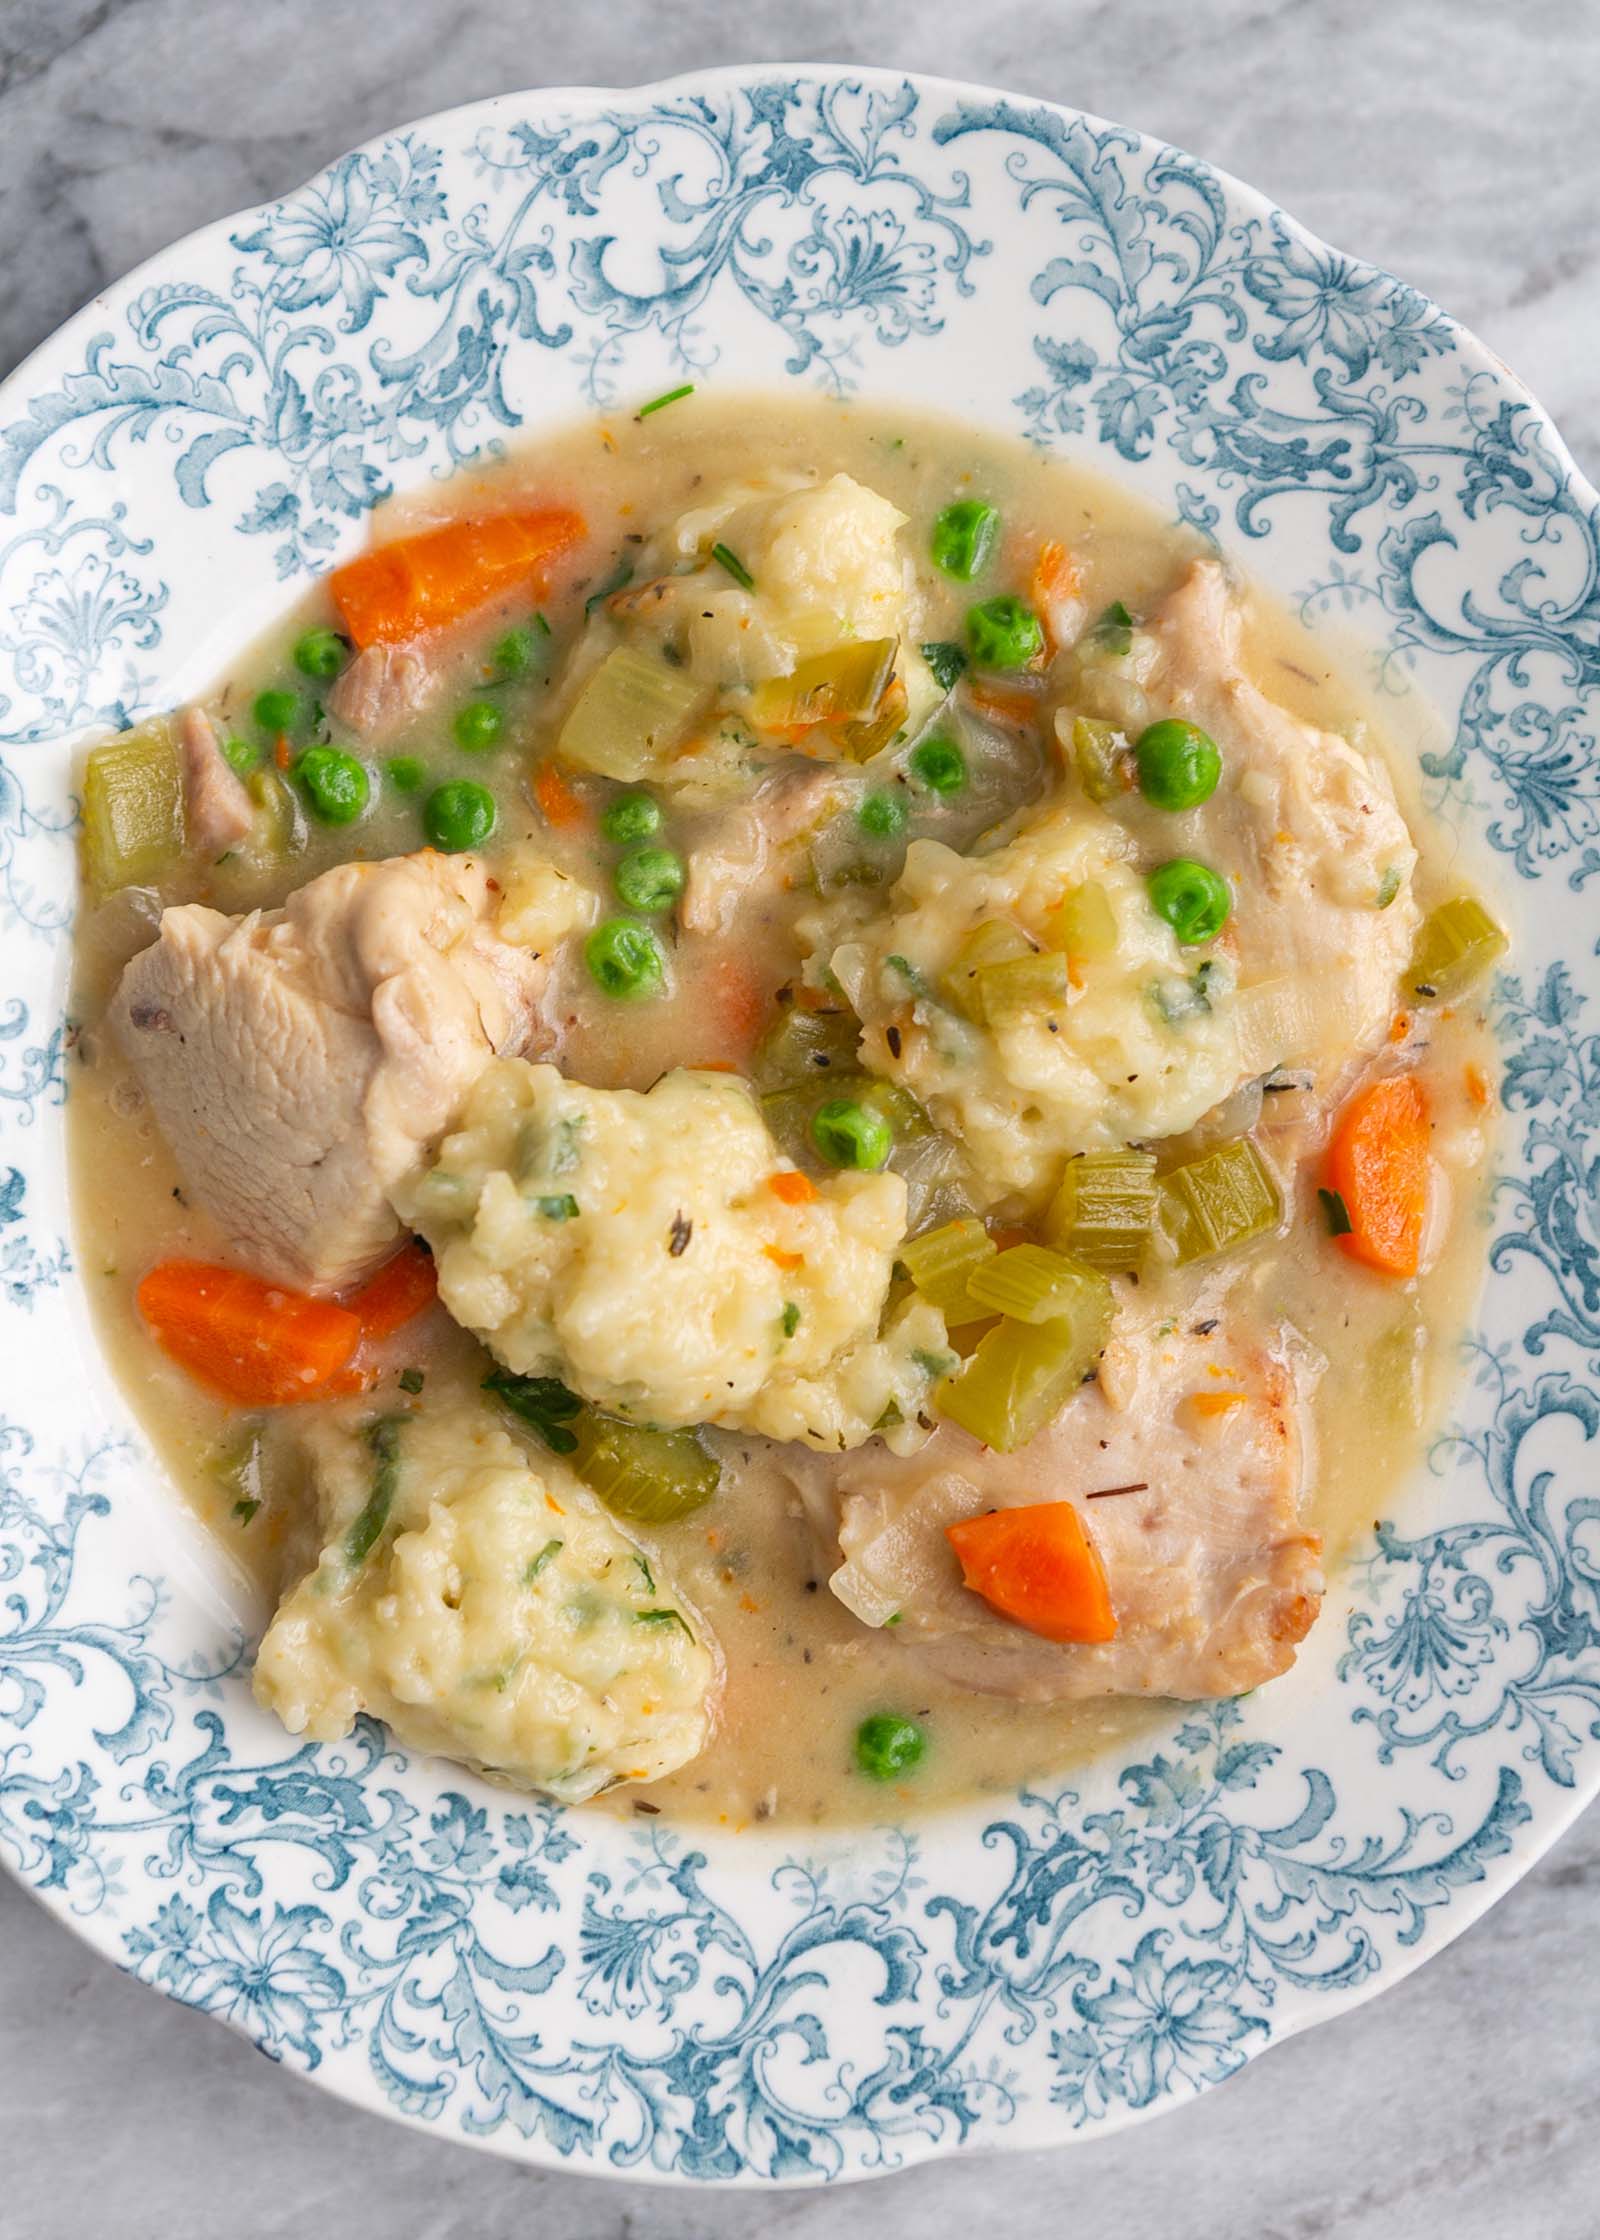 Chicken and dumplings ladled into a china bowl.